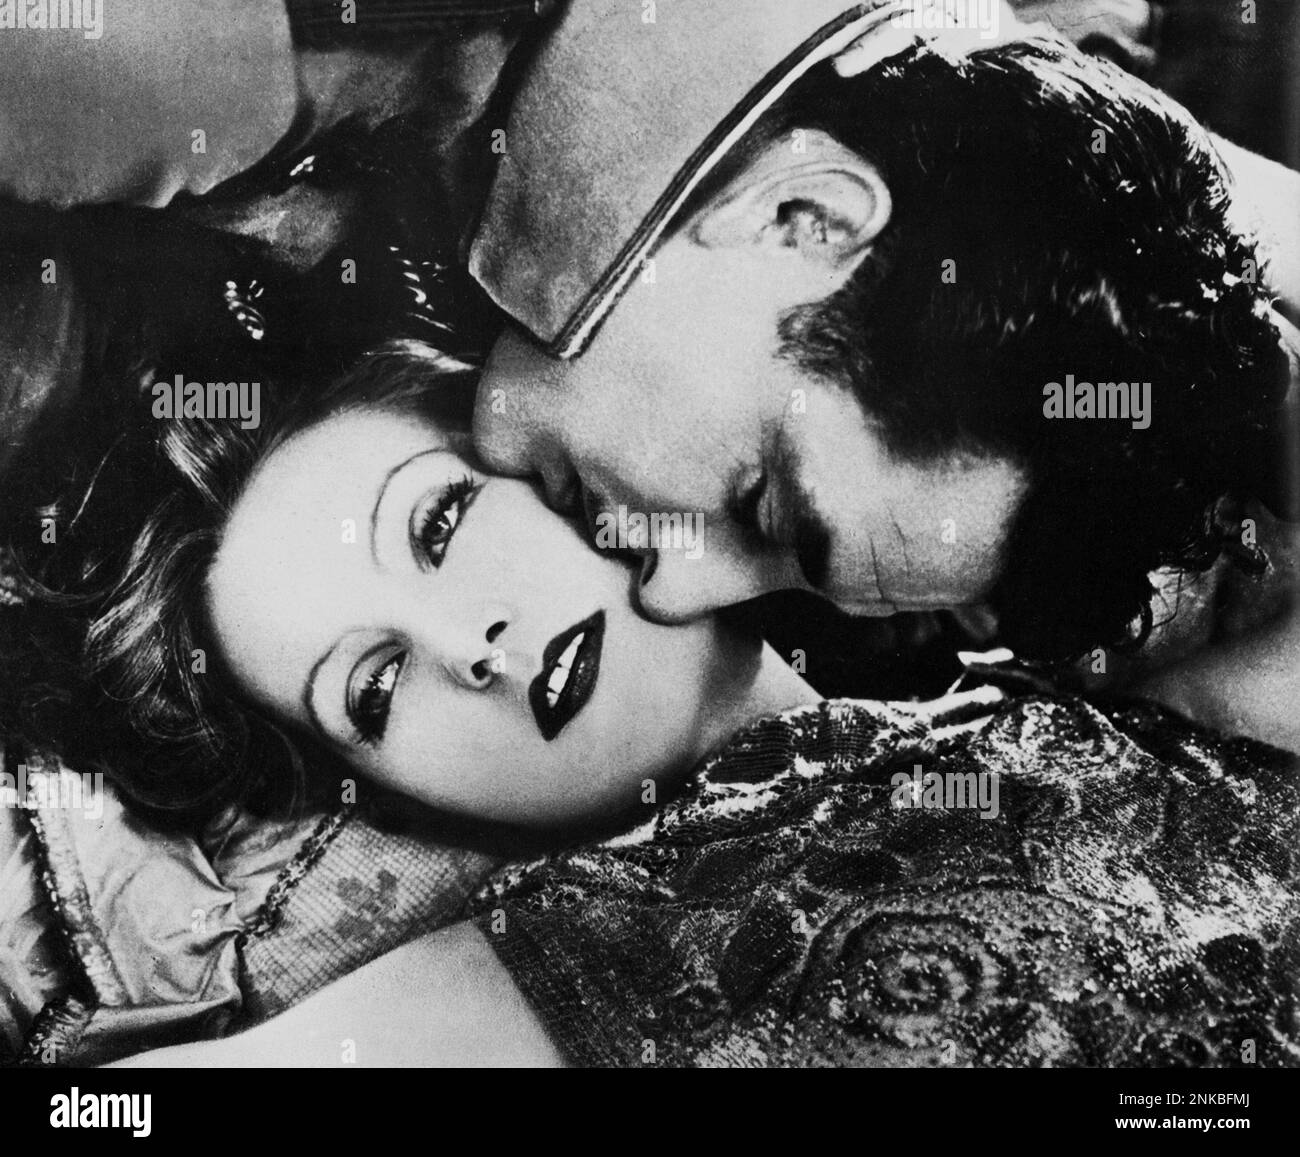 1926 : GRETA GARBO and JOHN GILBERT  in FLESH AND THE DEVIL ( 1927 - La carne e il diavolo ) by Clarence Brown , from the romance The Undying Past by Hermann Sudermann , costume dress by ADRIAN - MGM - Metro Goldwyn Mayer - MOVIE - HOLLYWOOD - CINEMA - FILM - actress - attrice  - profilo - profile  - bacio - kiss - baffi - moustache - lovers - amanti - innamorati ----  Archivio GBB Stock Photo